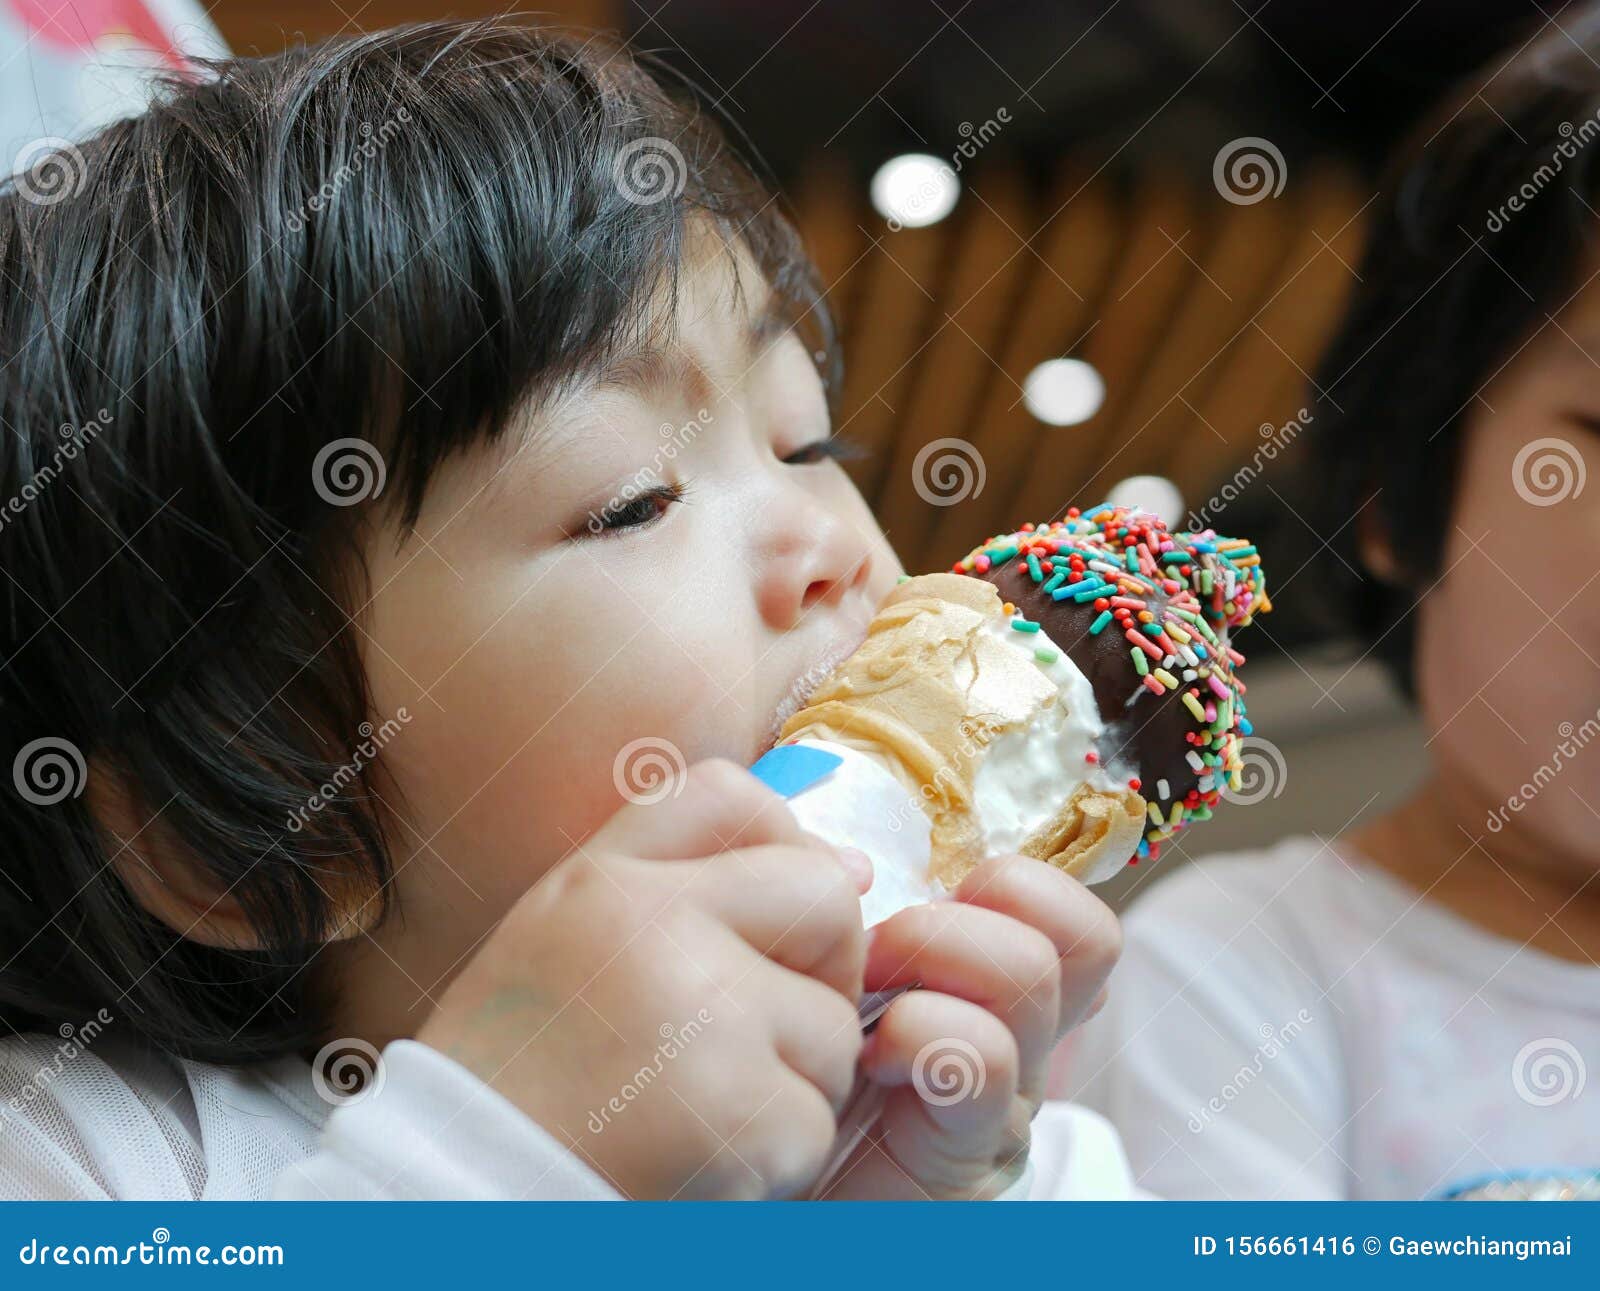 little asian baby girl, 2 years old, feeling blissful eating / biting ice cream cone - facial expression of joyfulness